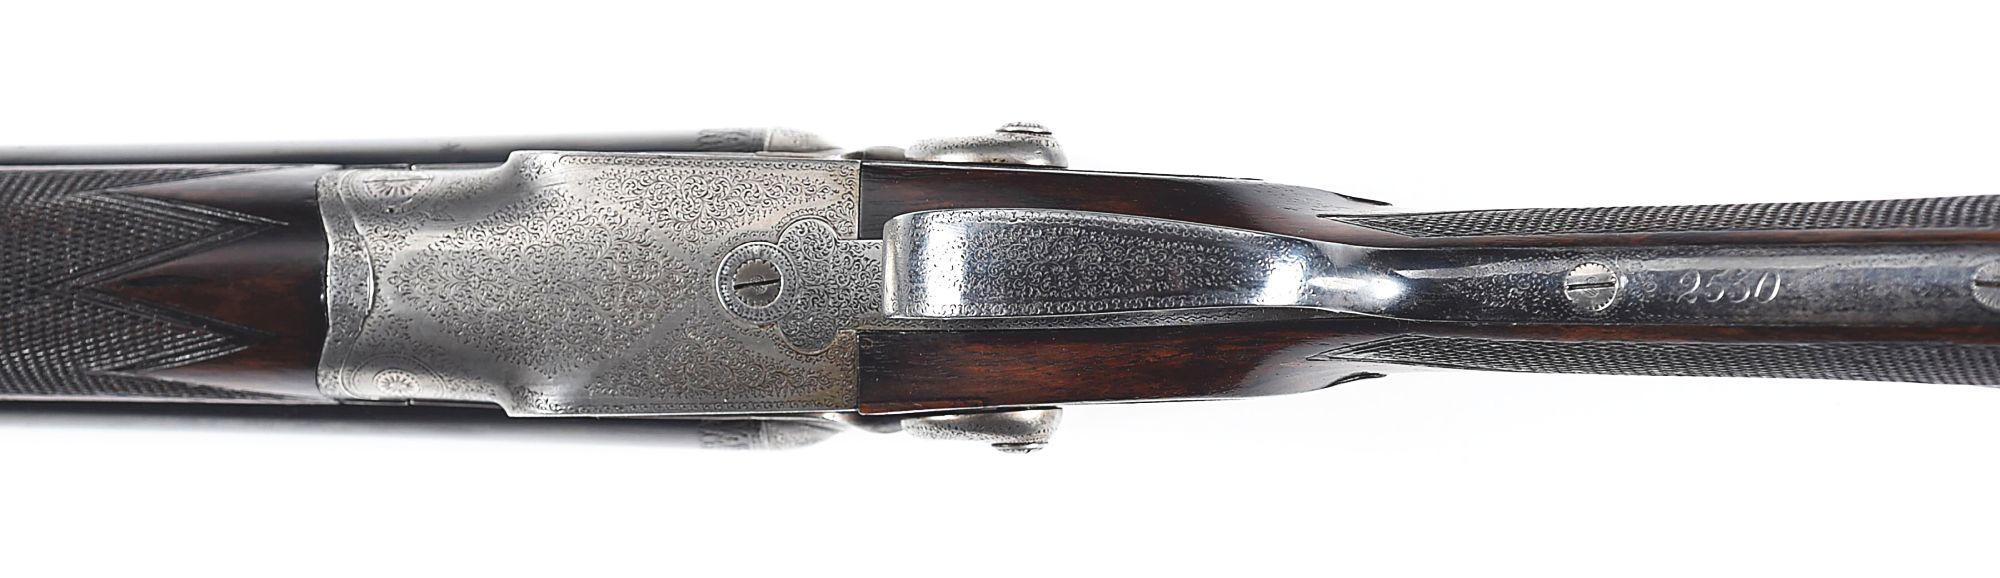 (A) J SQUIRES 16 GAUGE SIDE BY SIDE SHOTGUN WITH HAMMERS.